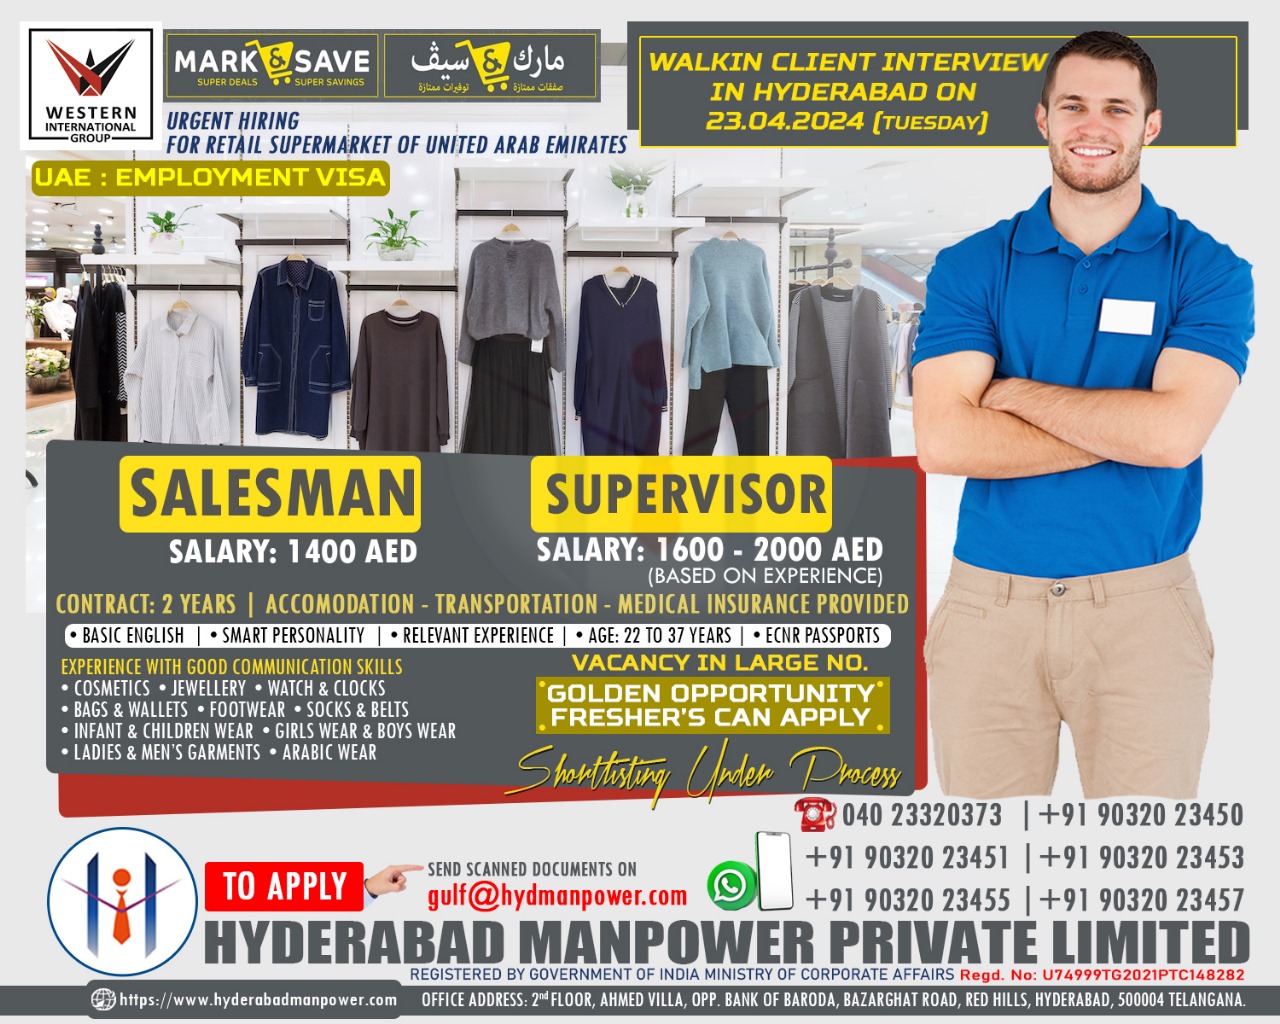 Client Interview in Hyderabad on 23rd April 2024